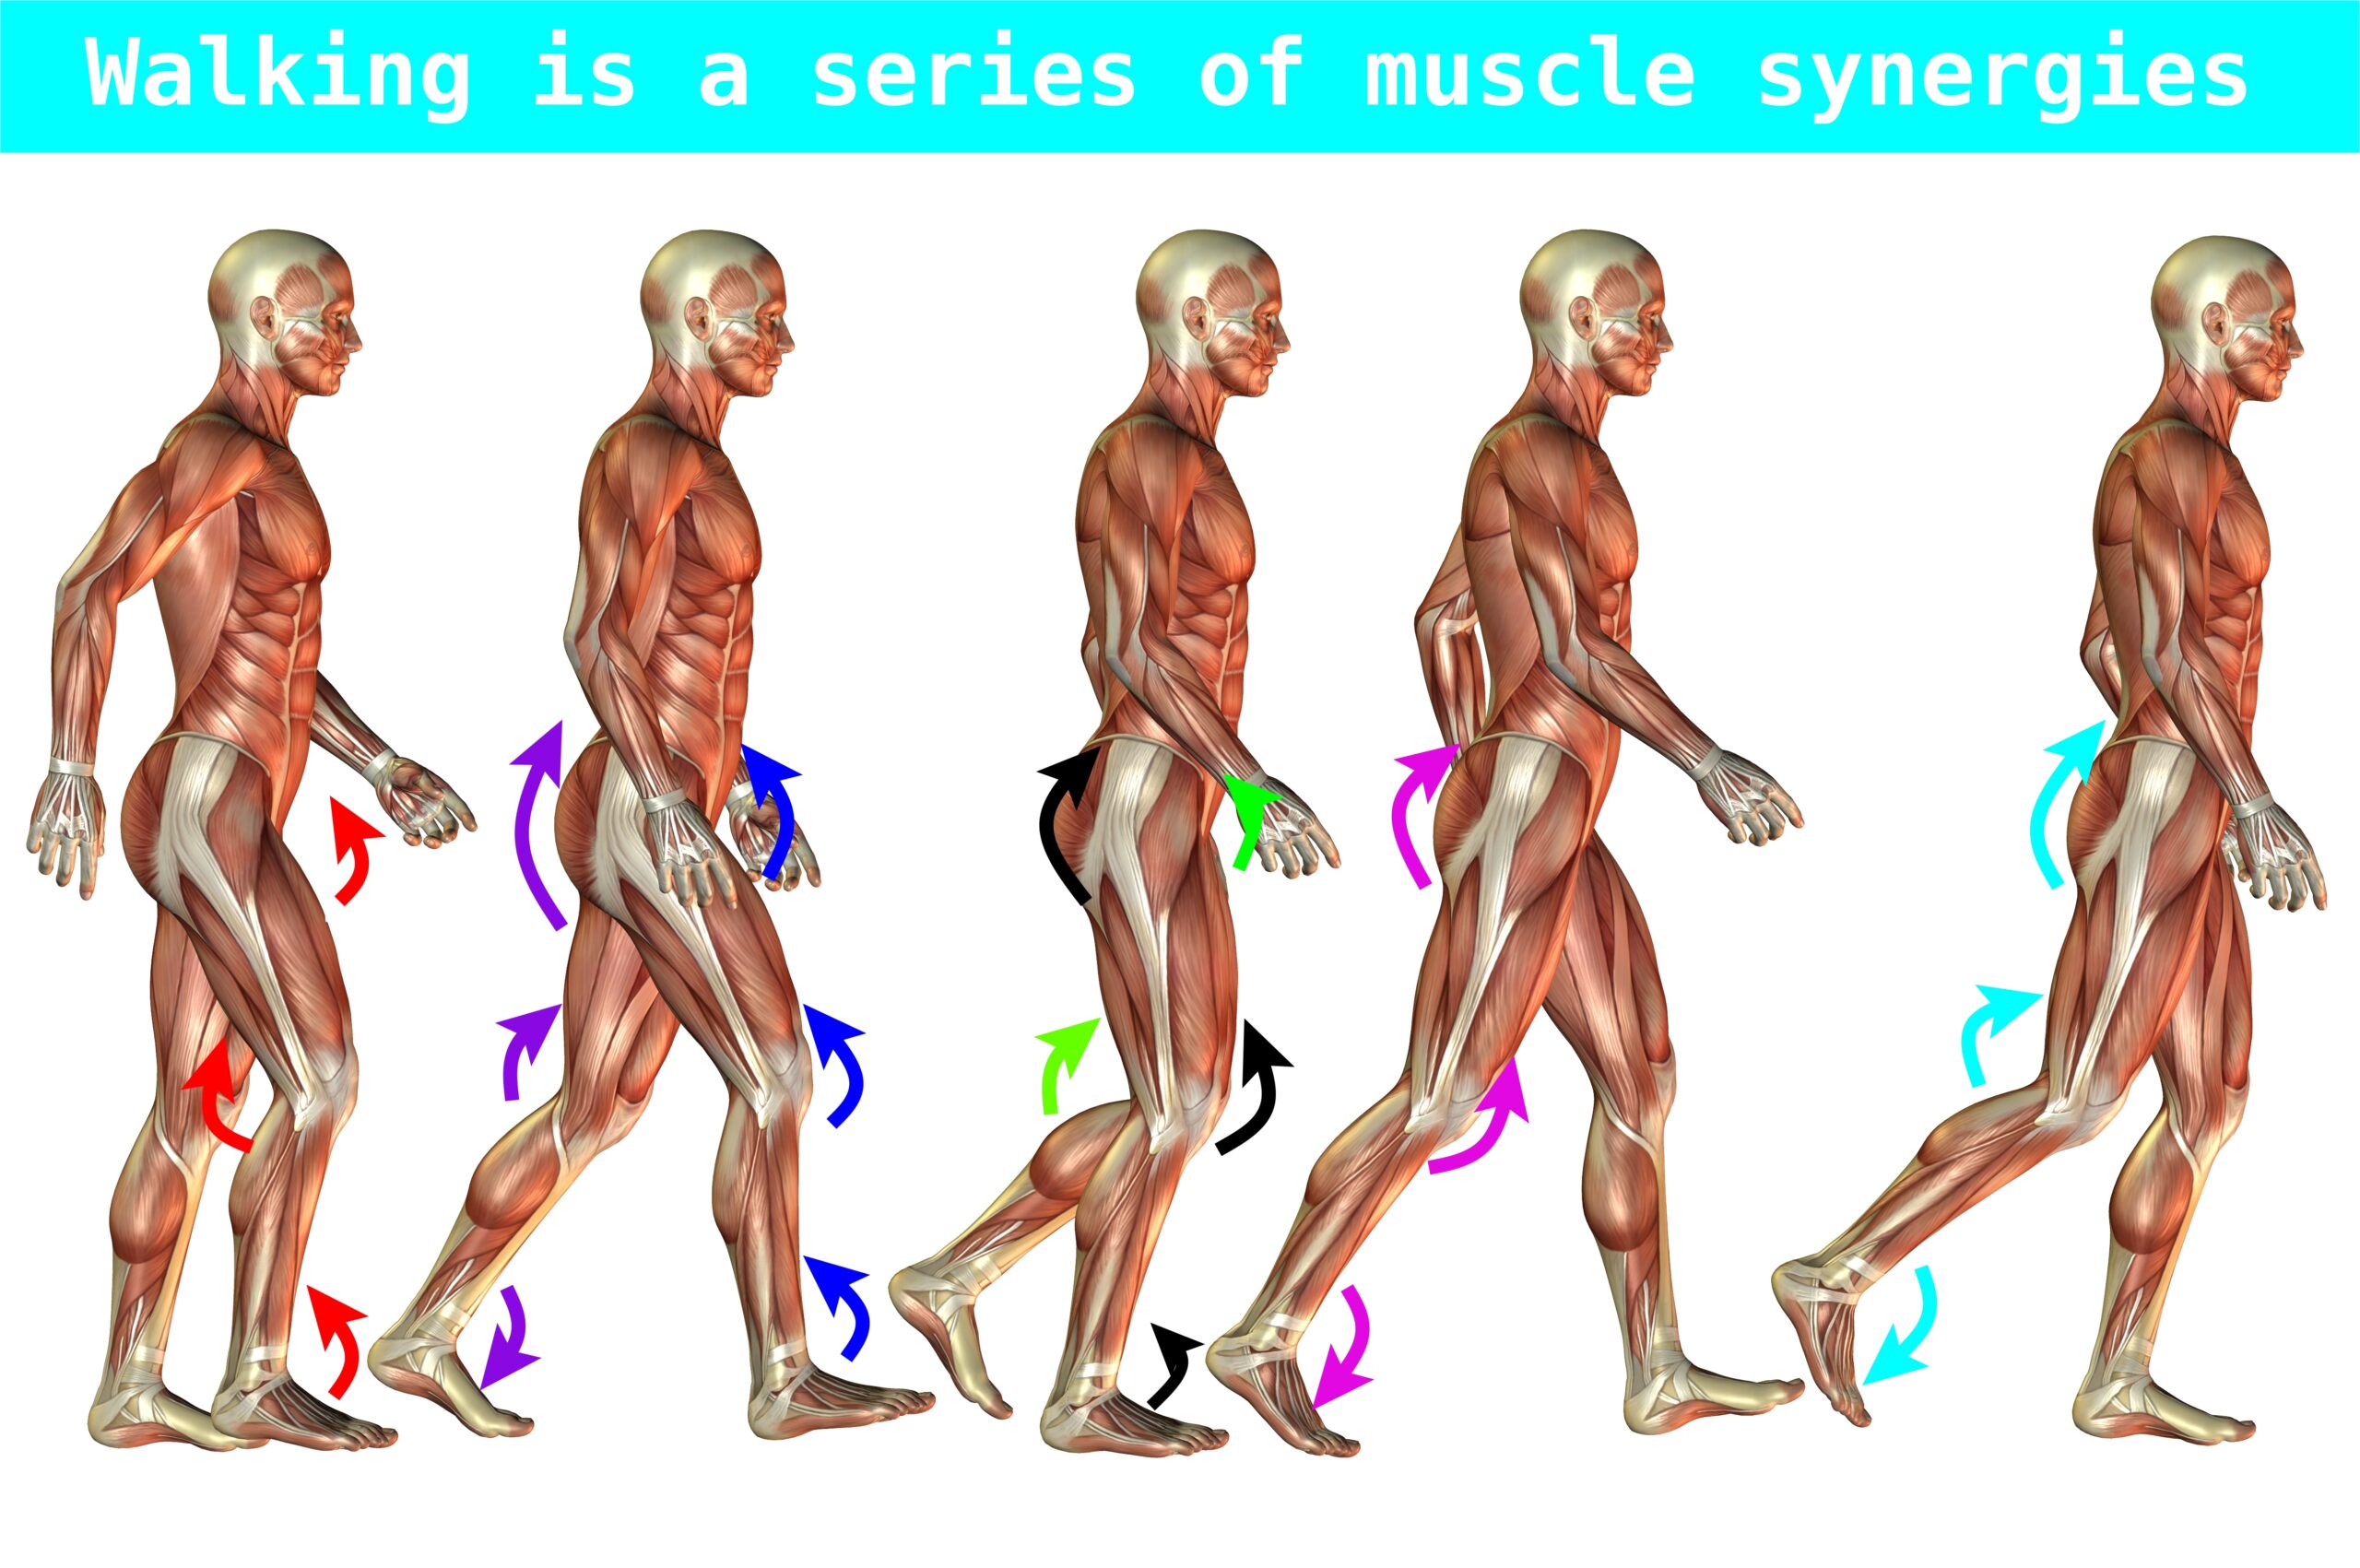 muscle synergies shown during the gait cycle